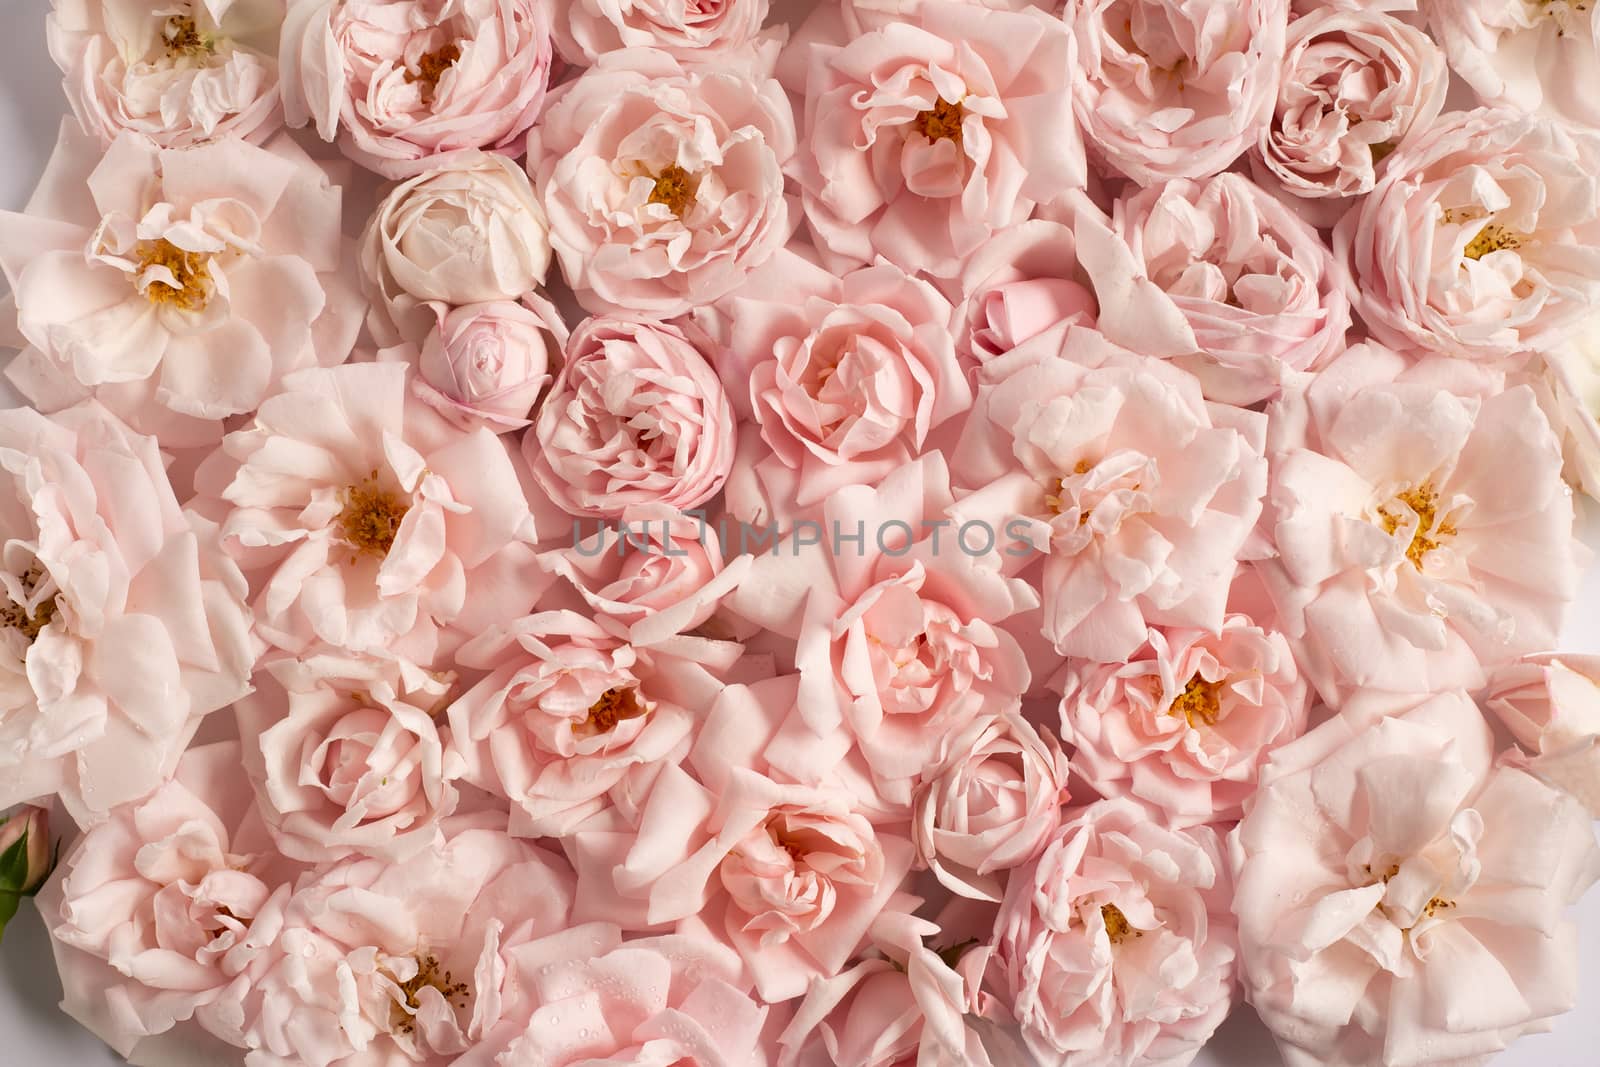 Bright pink roses background by NelliPolk